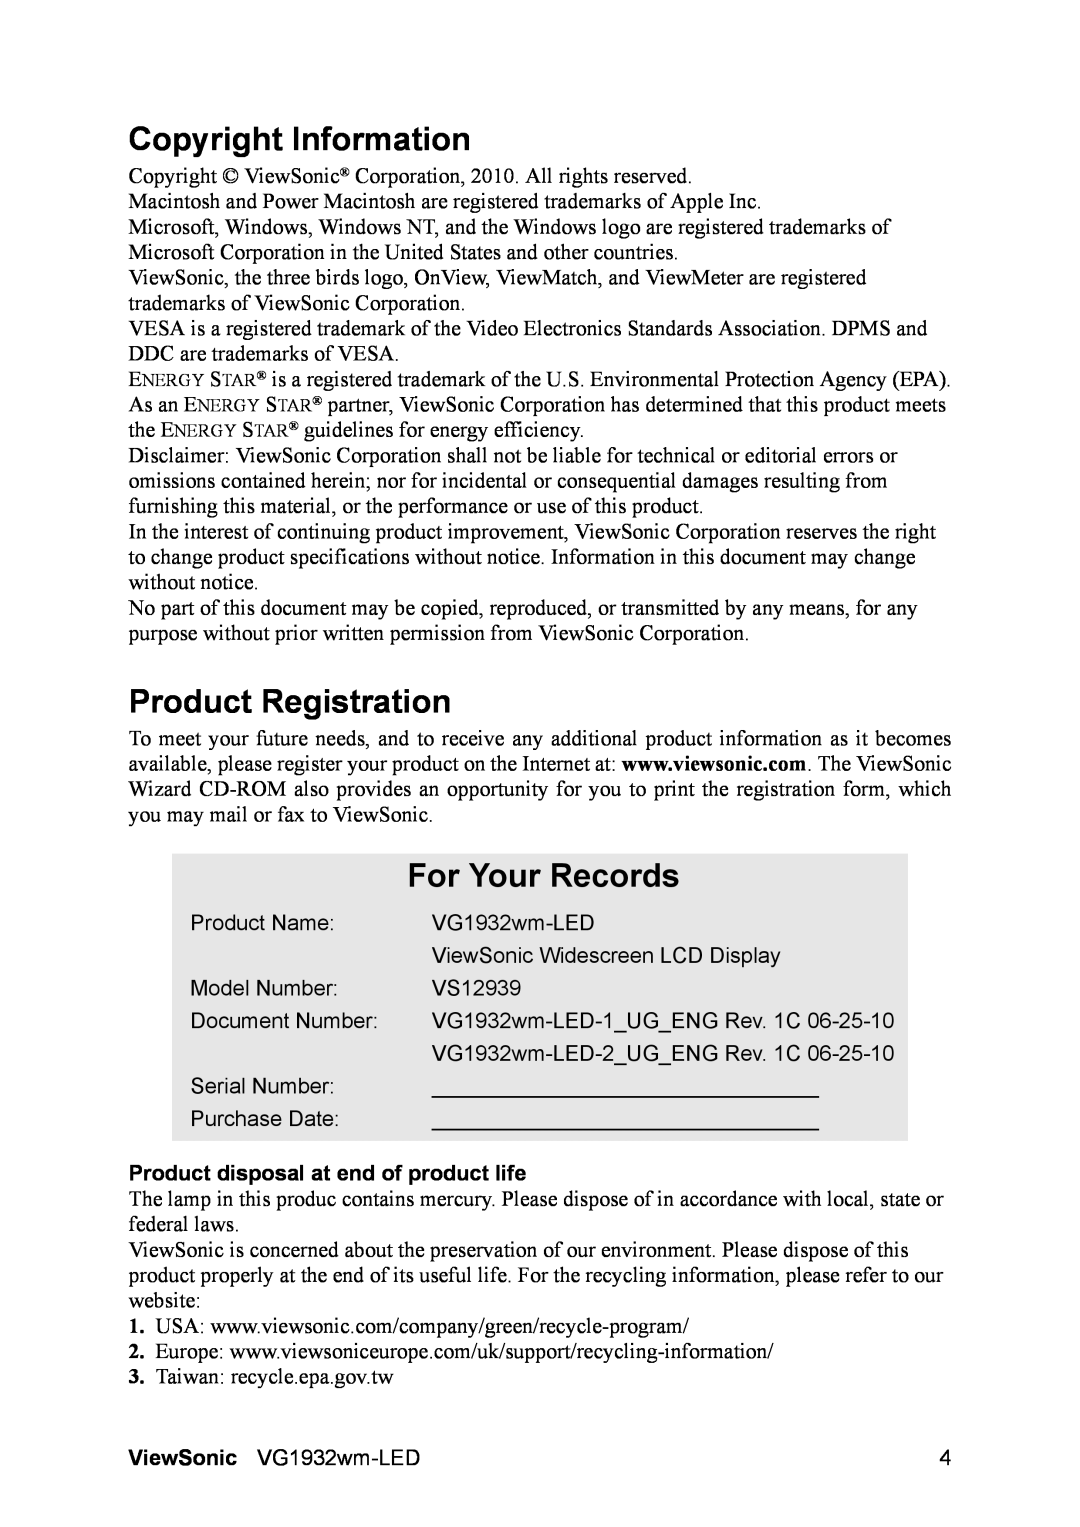 ViewSonic VS12939 Copyright Information, Product Registration, For Your Records, Product disposal at end of product life 